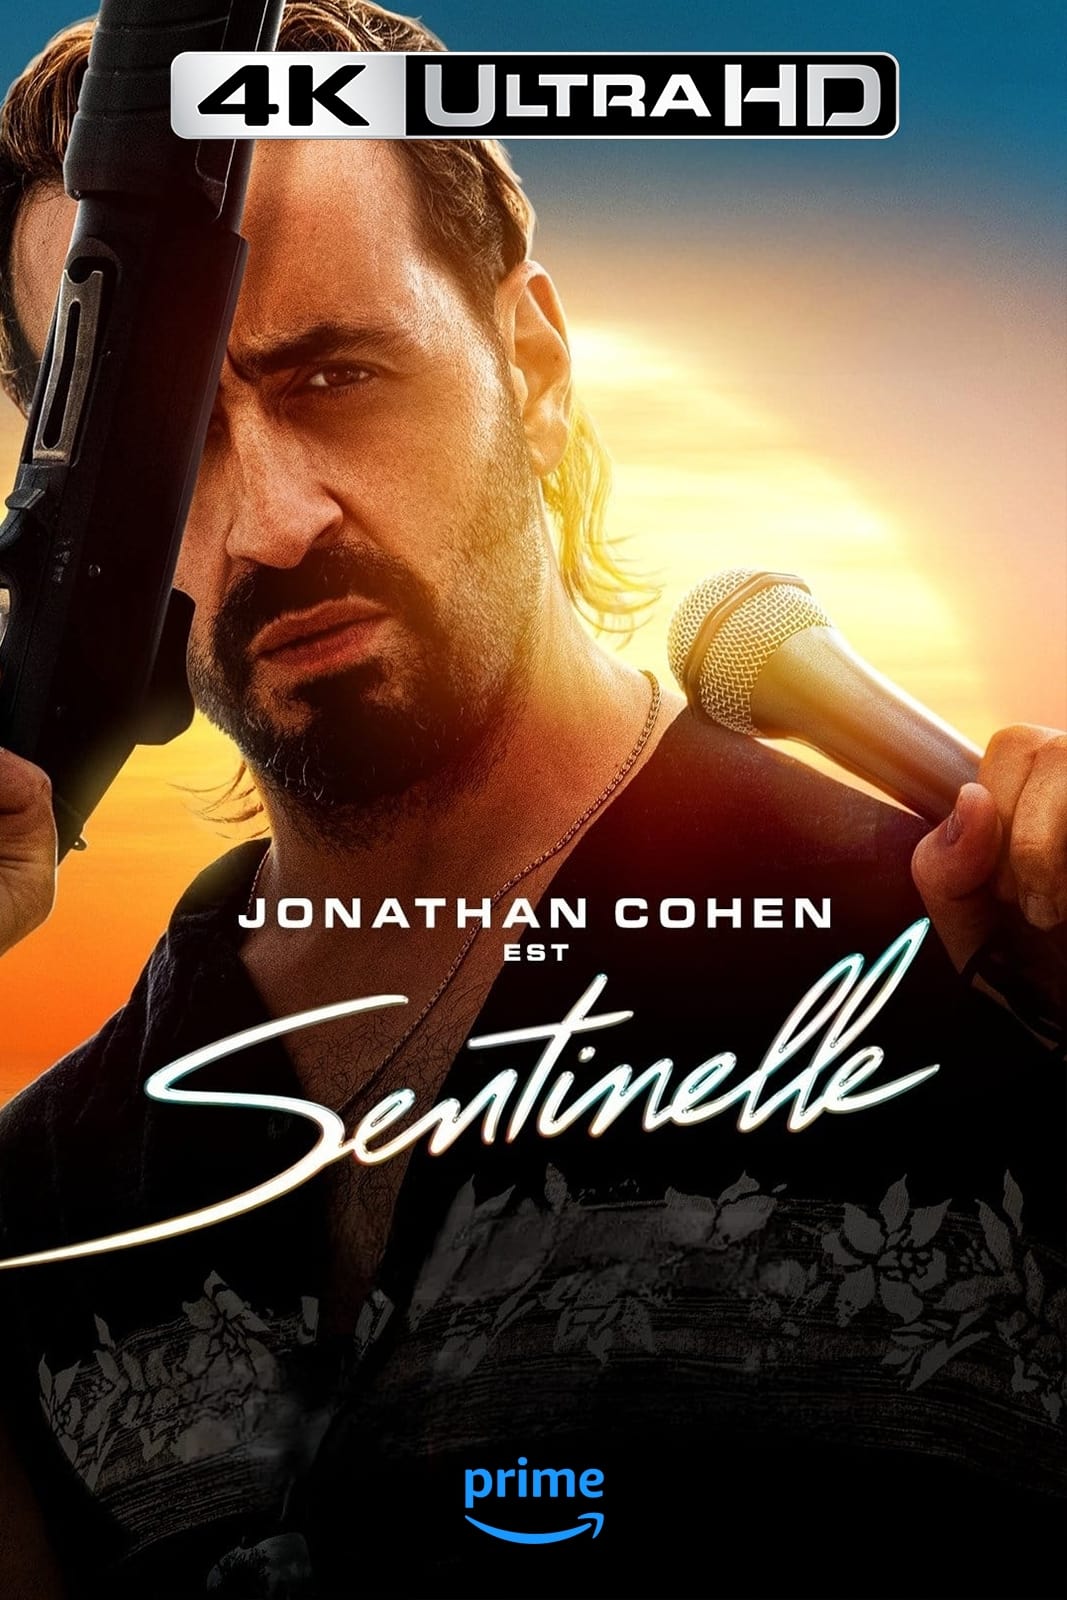 François Sentinelle has two lives. By day, he is the most famous cop of Réunion Island, known for his tough methods and flowery shirts, pursuing criminals in his famous yellow defender. But the rest of the time, Sentinelle is also a charming singer.